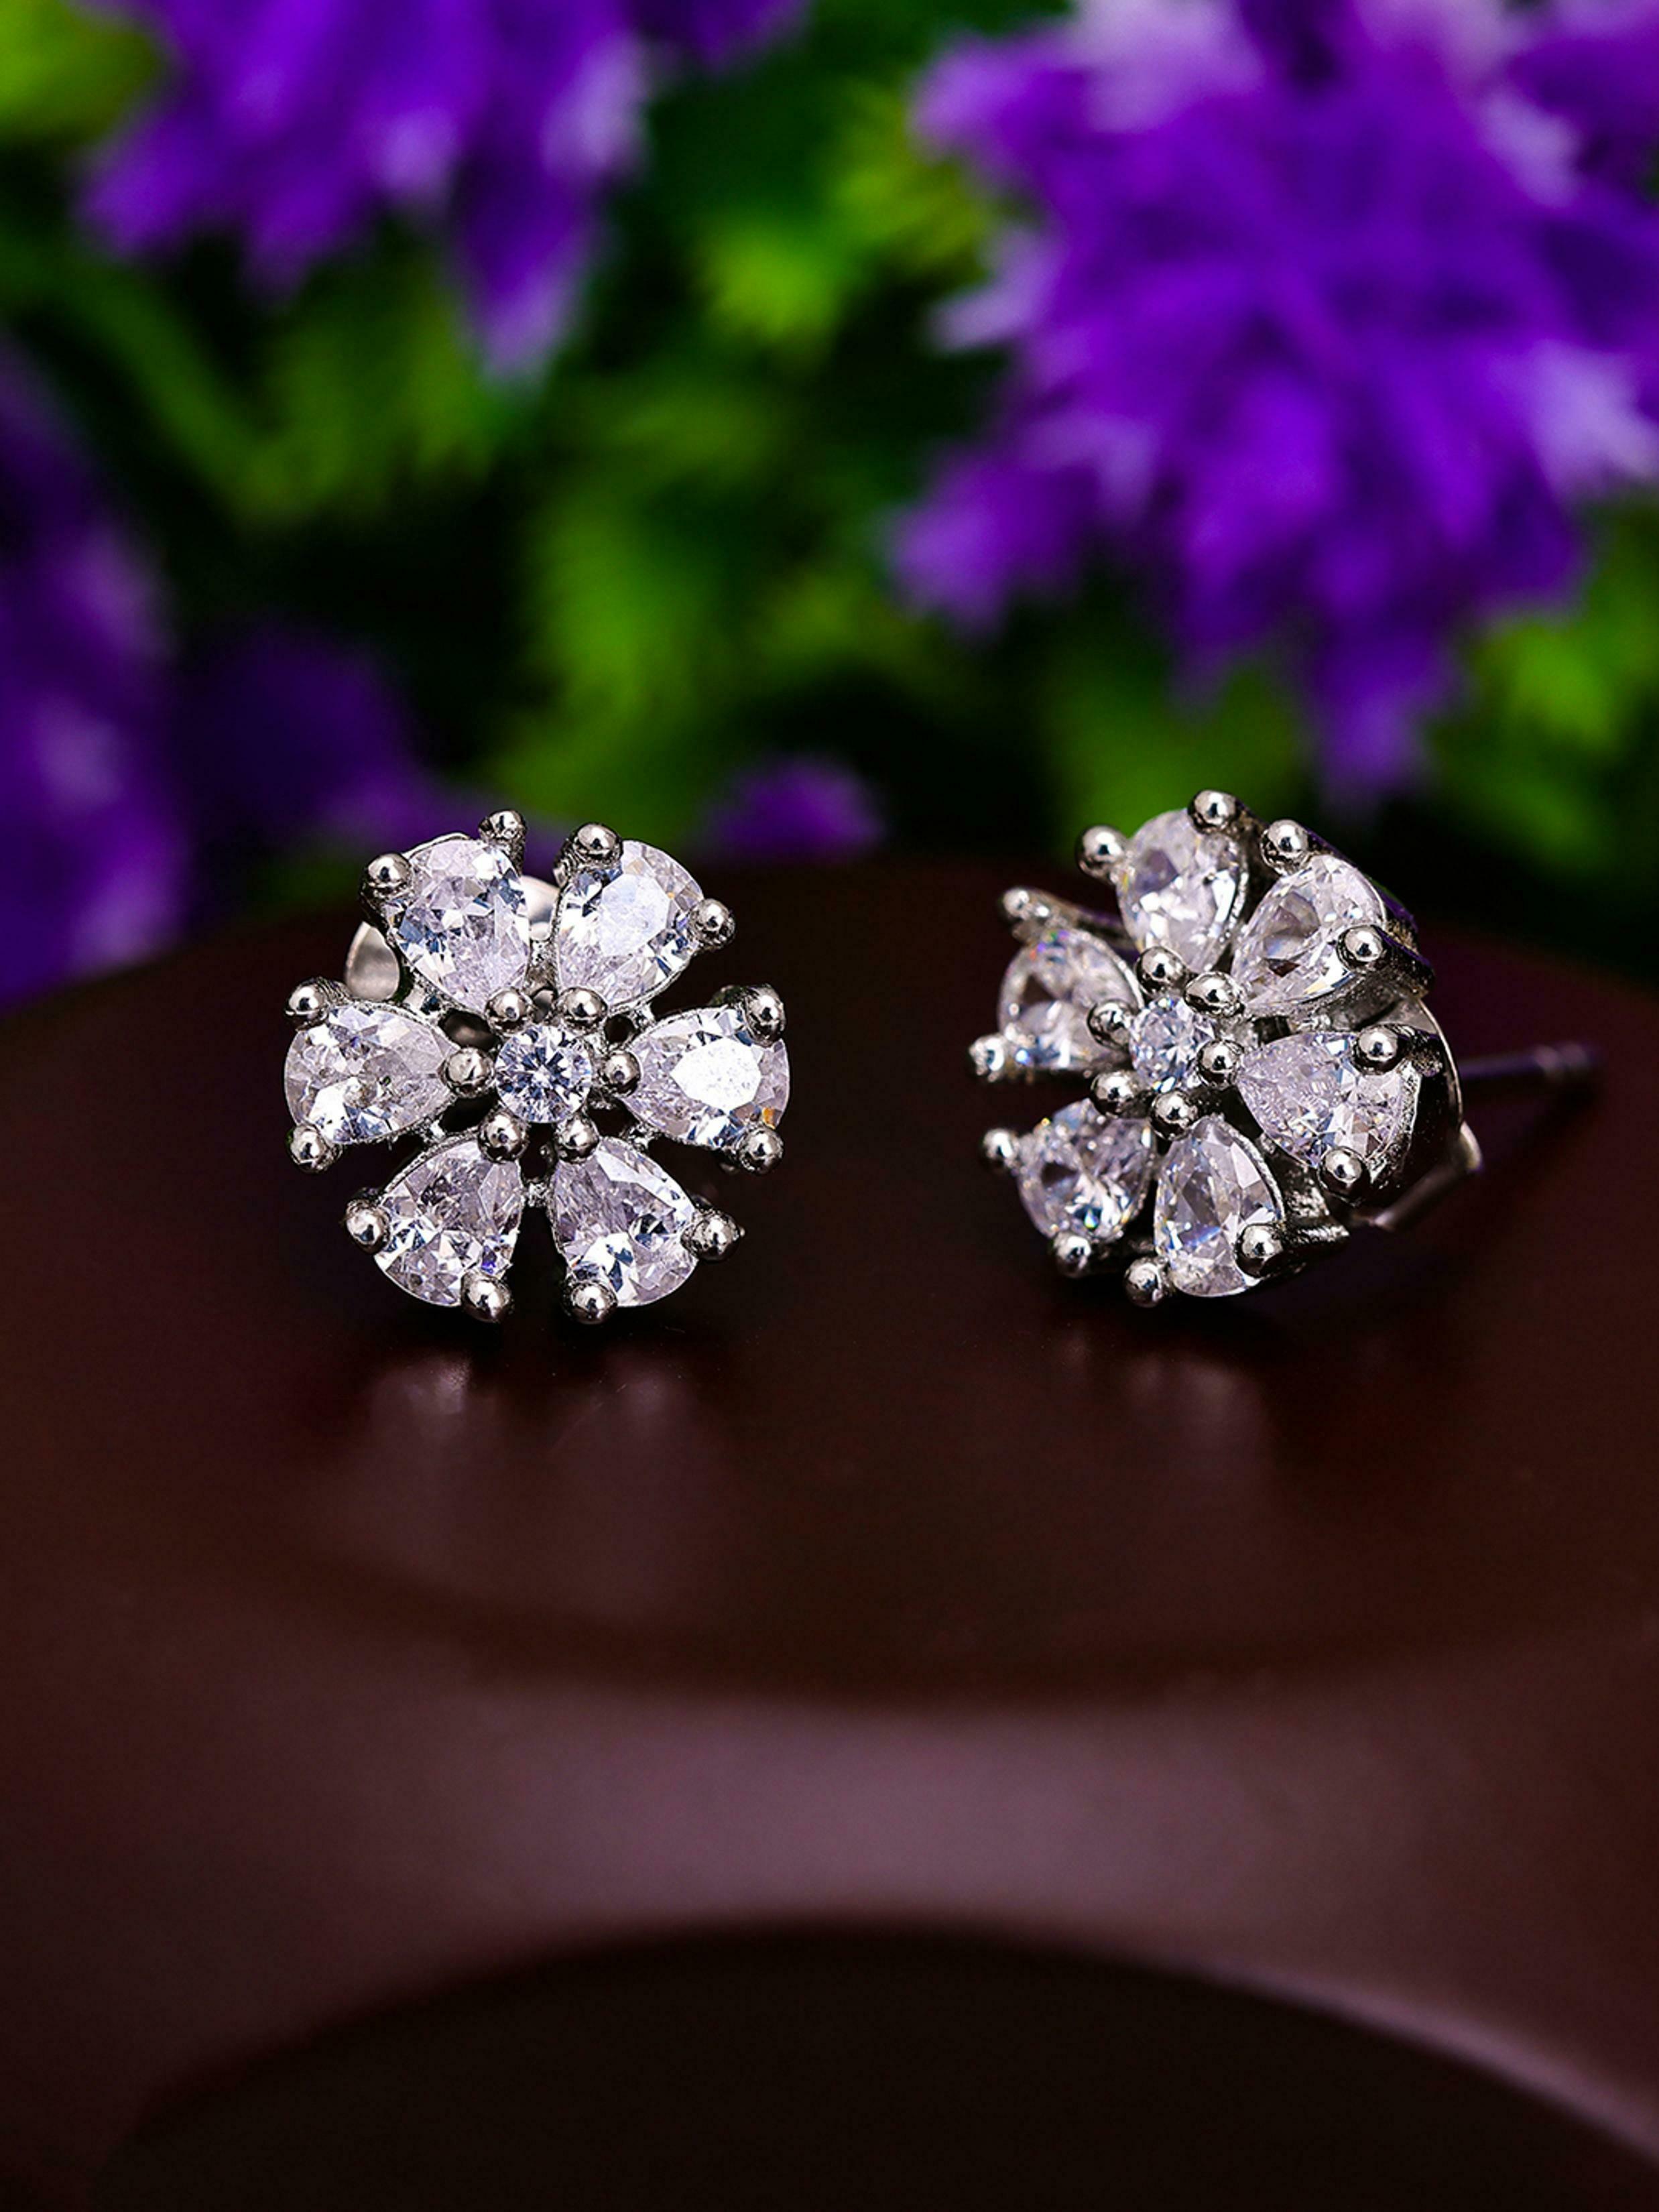 Details more than 83 cubic zirconia earrings india latest